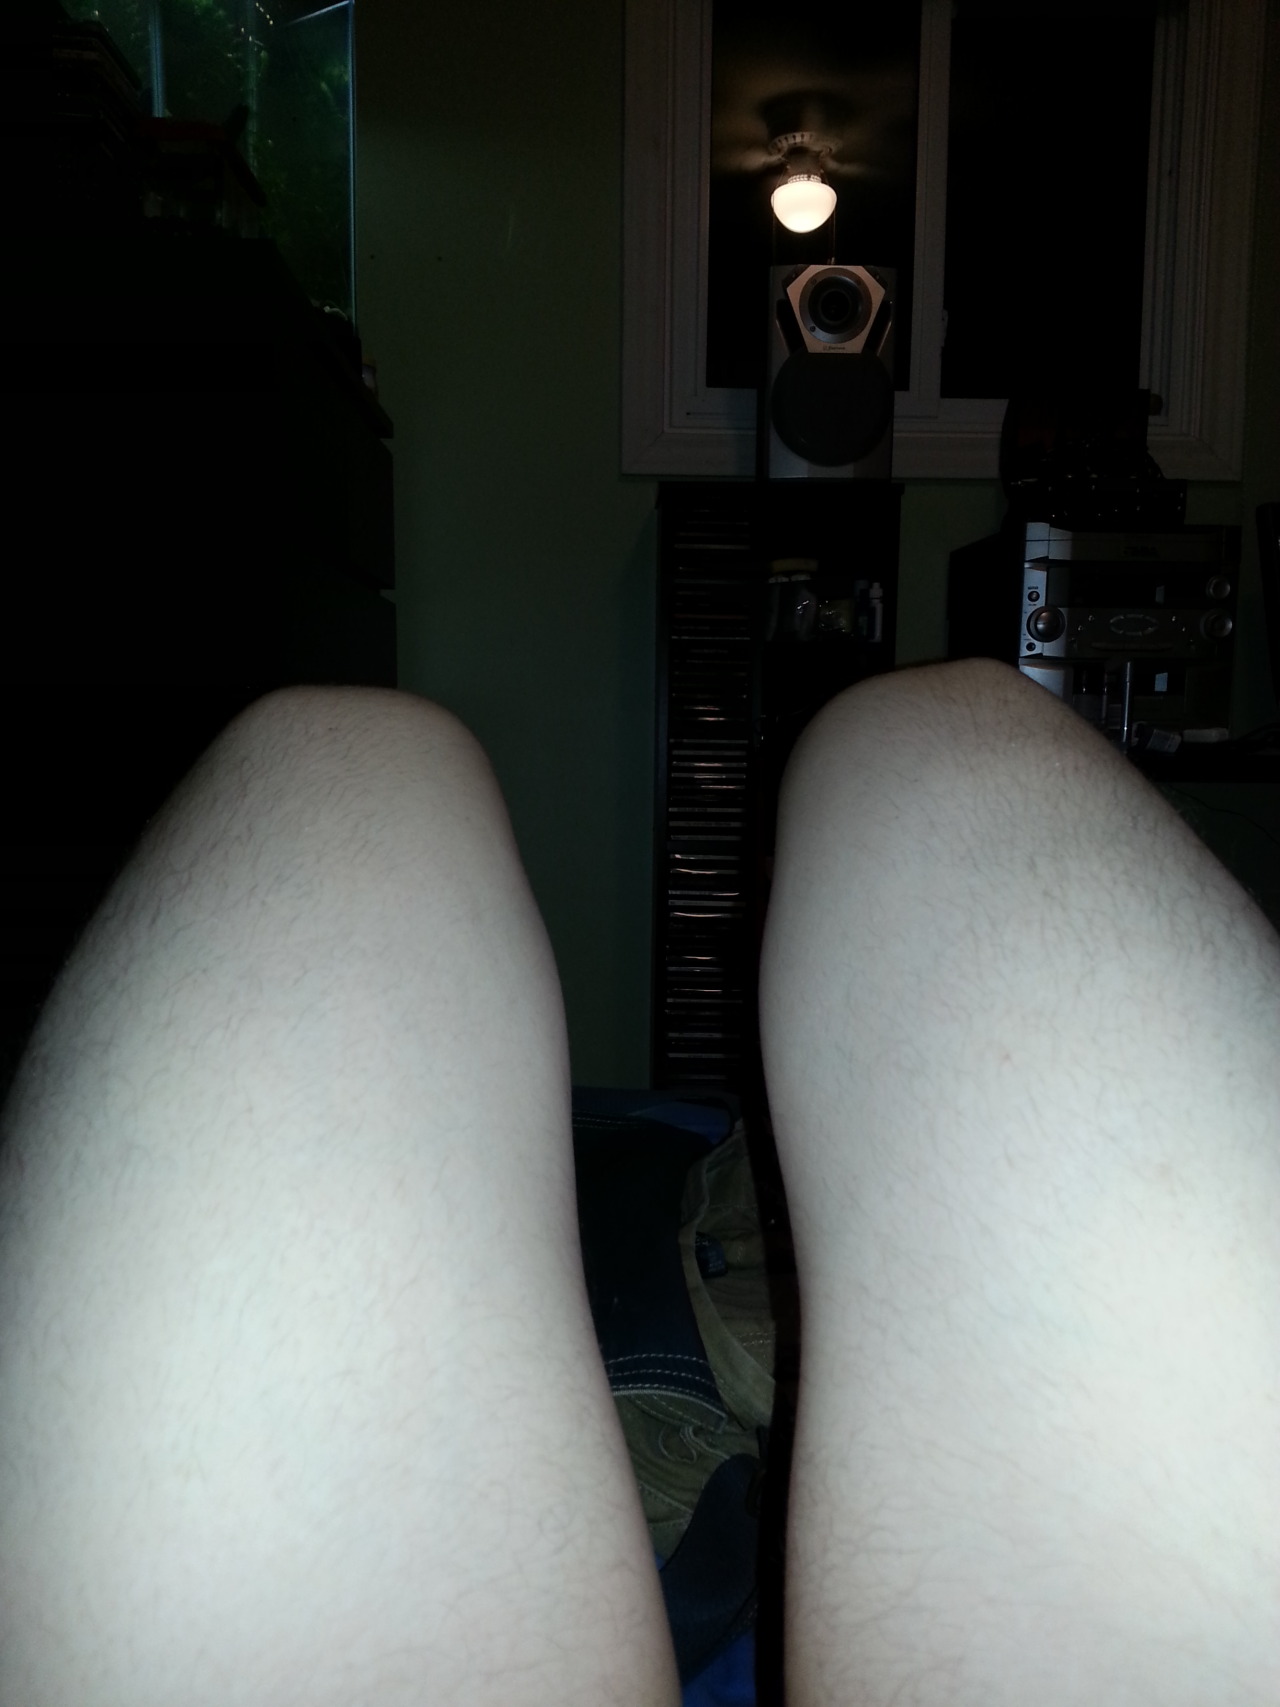 Hot Dogs or Legs? I think it&#8217;s quite obvious..<br />
Ketchup/Mustard please